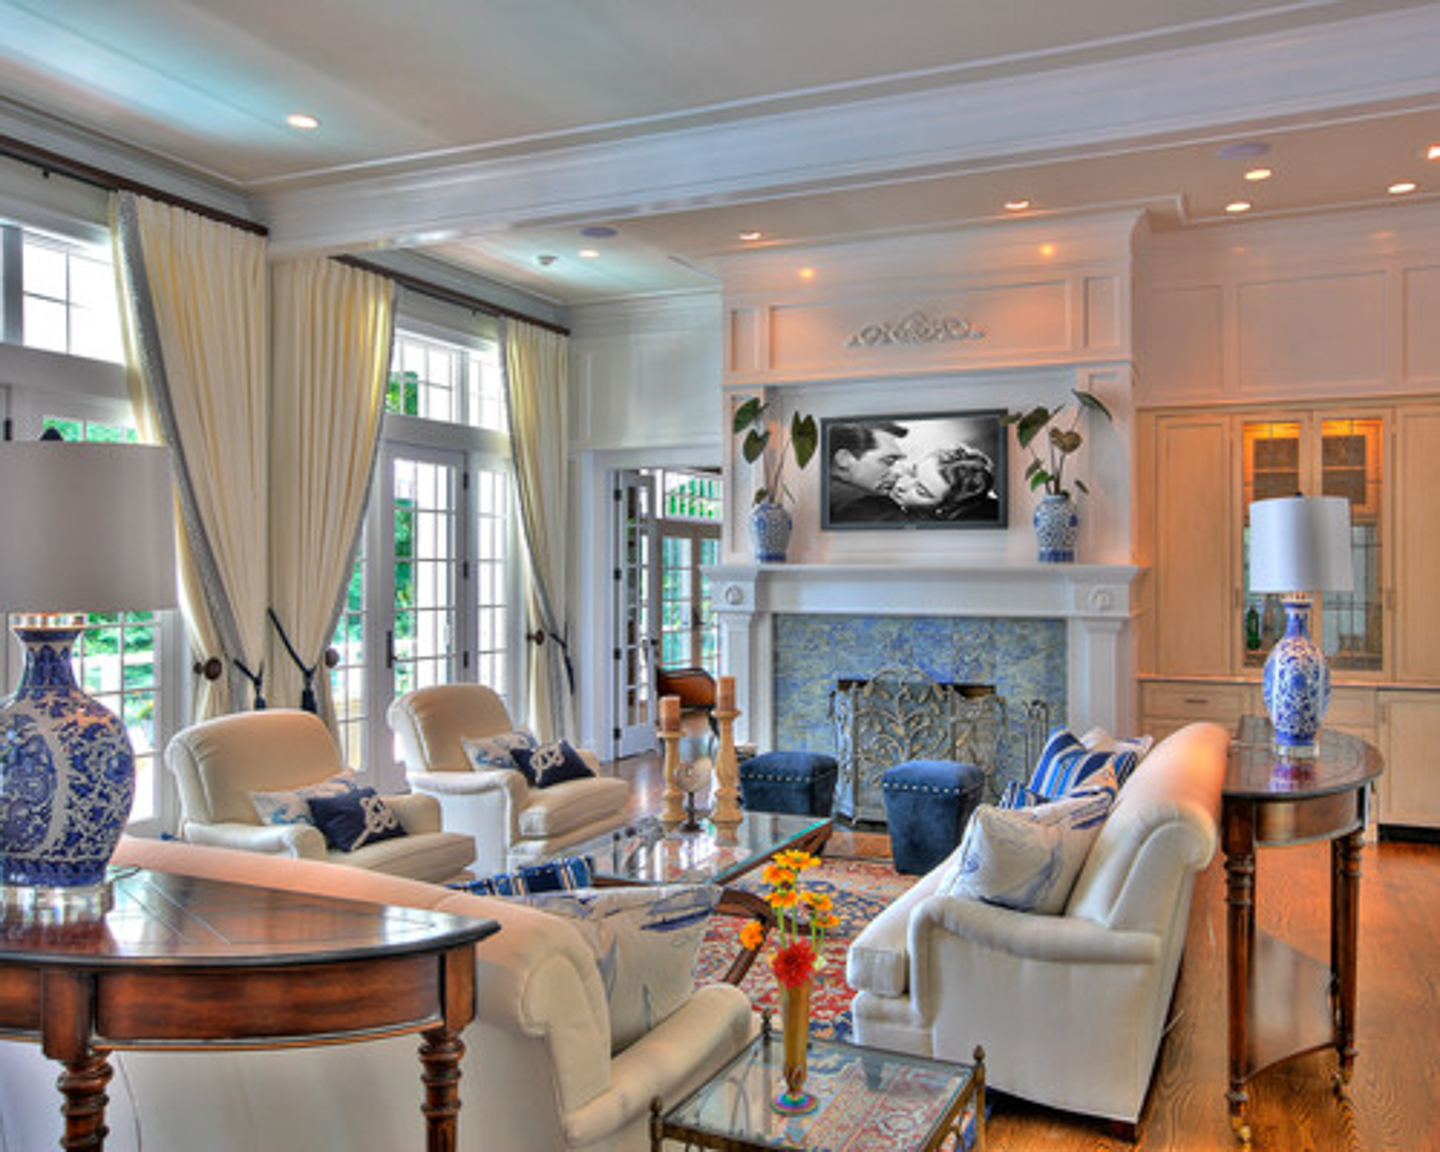 Blue and white traditional living room furniture layout